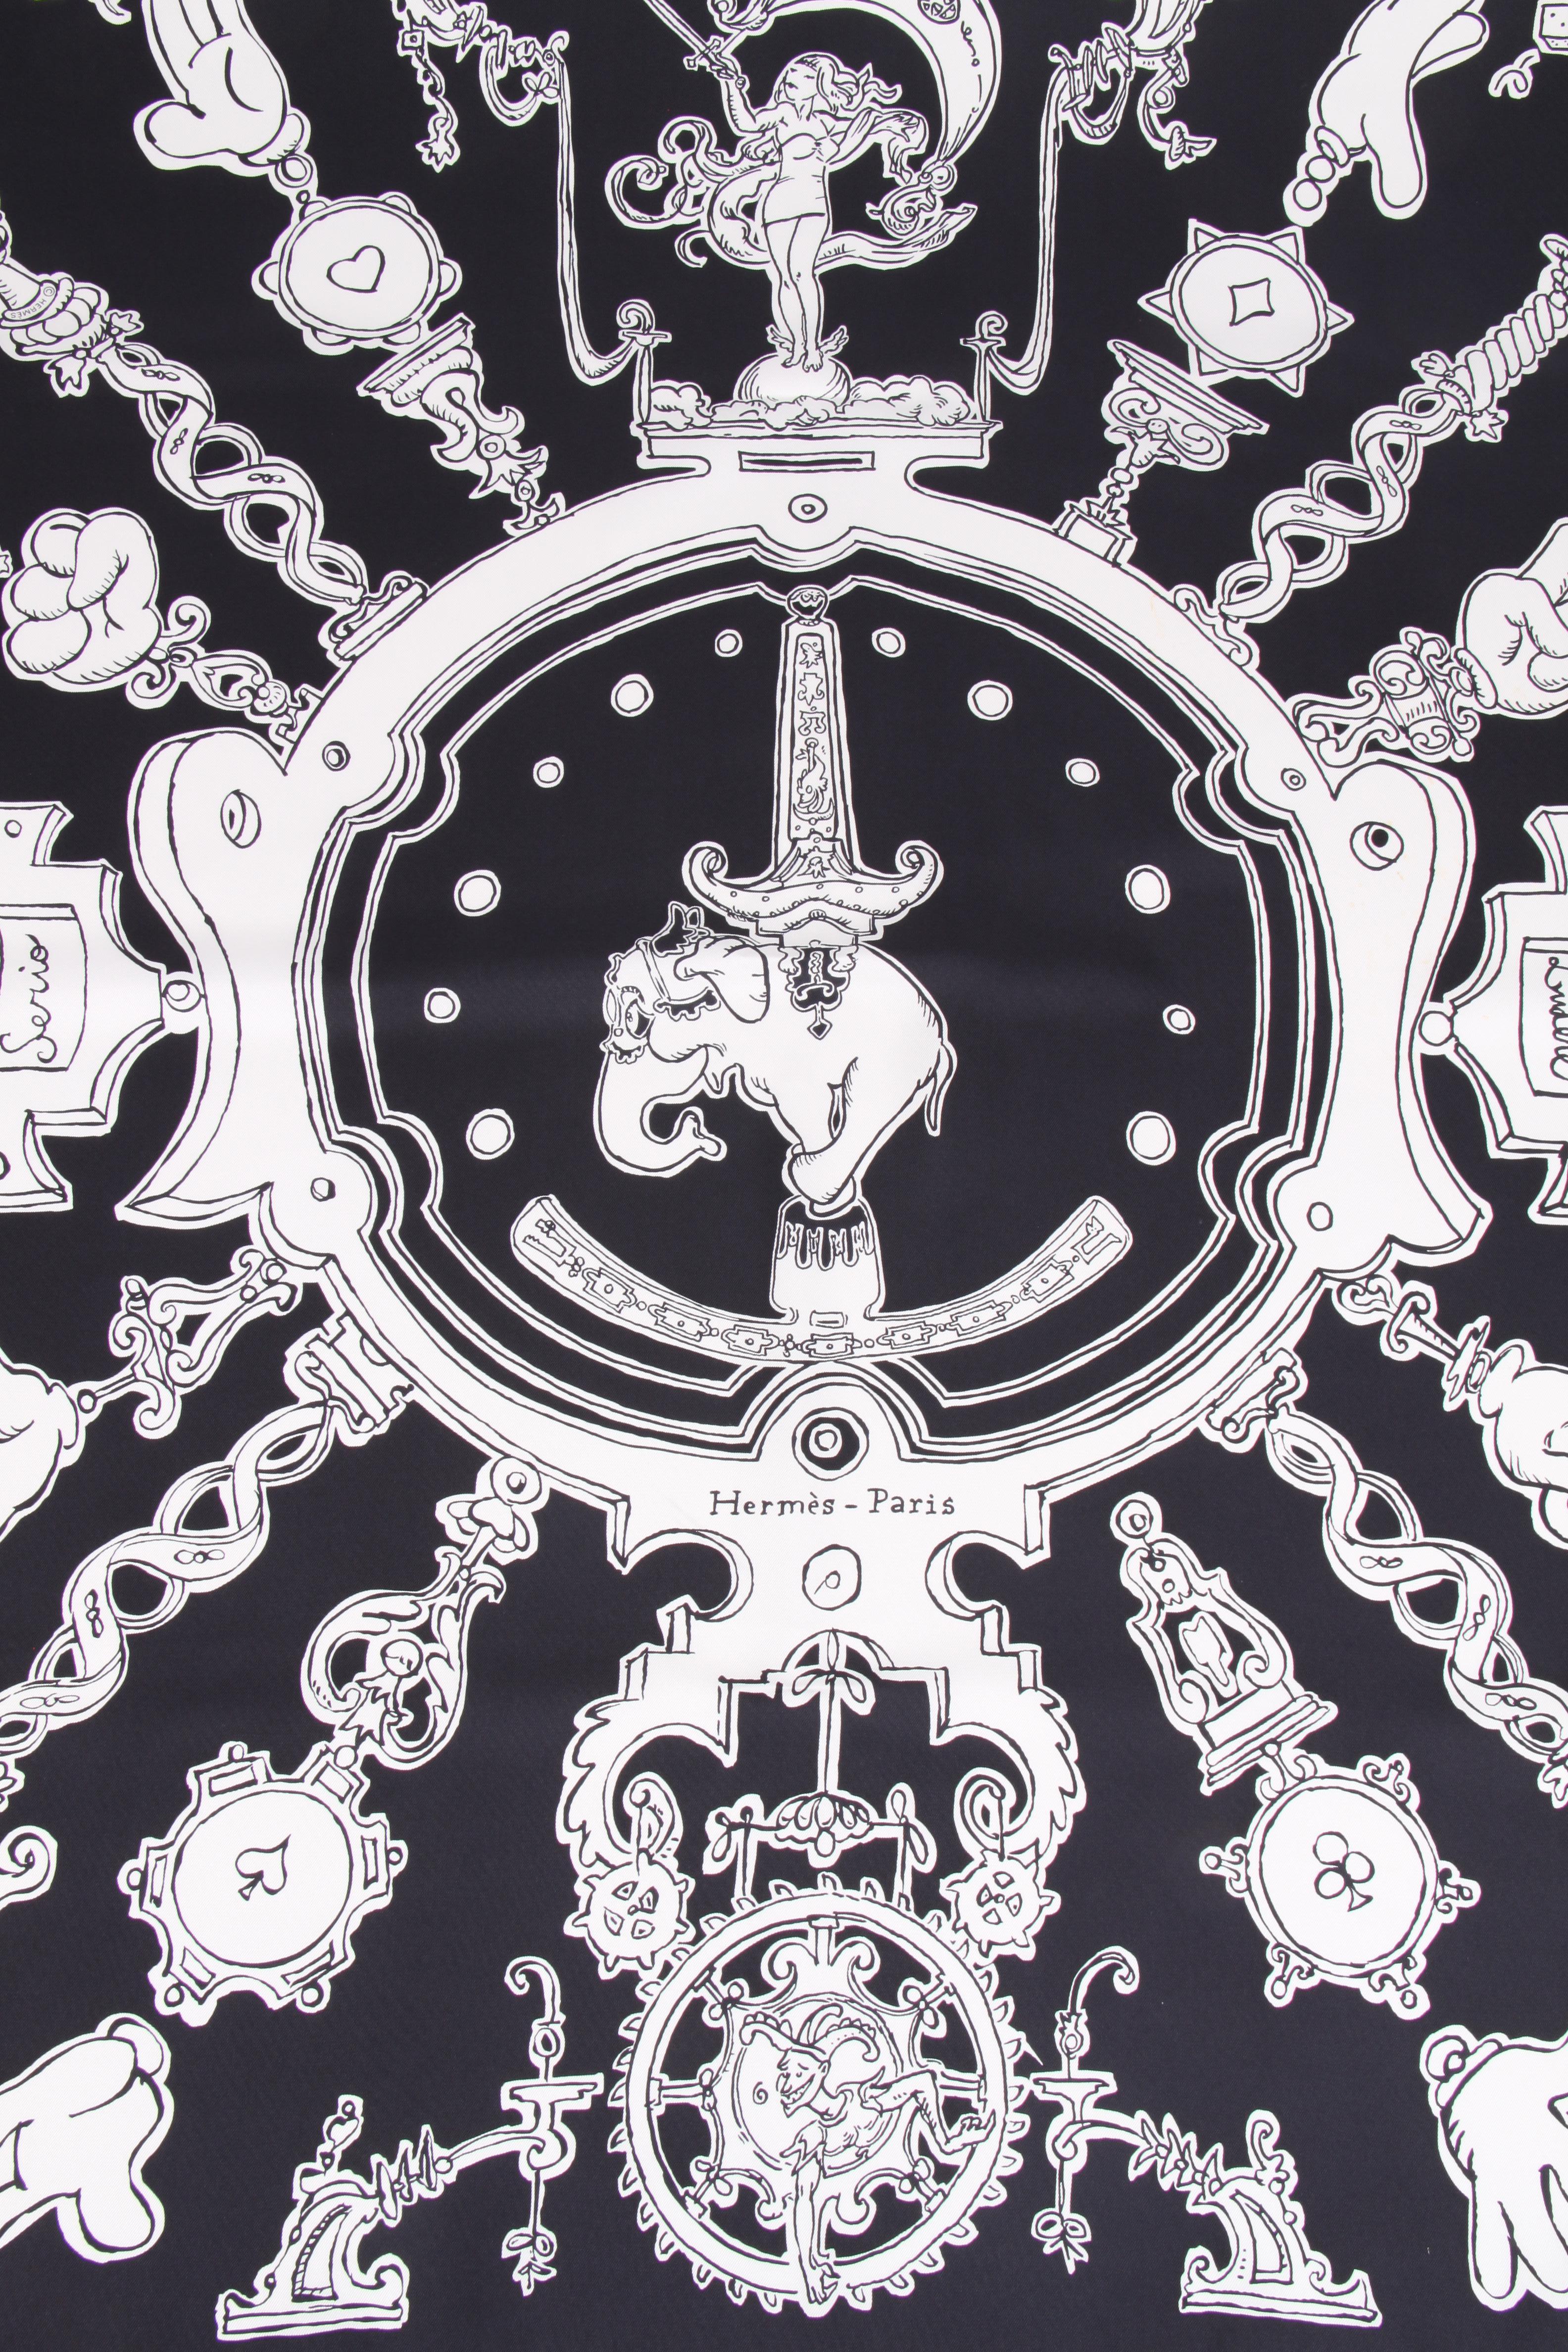 This amazing silk scarf by Hermes is covered with a black and white print. The foundation is black.

Name: Serio Ludere
Measurements: +/- 90 x 90 centimeters
Colors: black, white
Material: silk
Condition: good, unfortunately some small stains in the